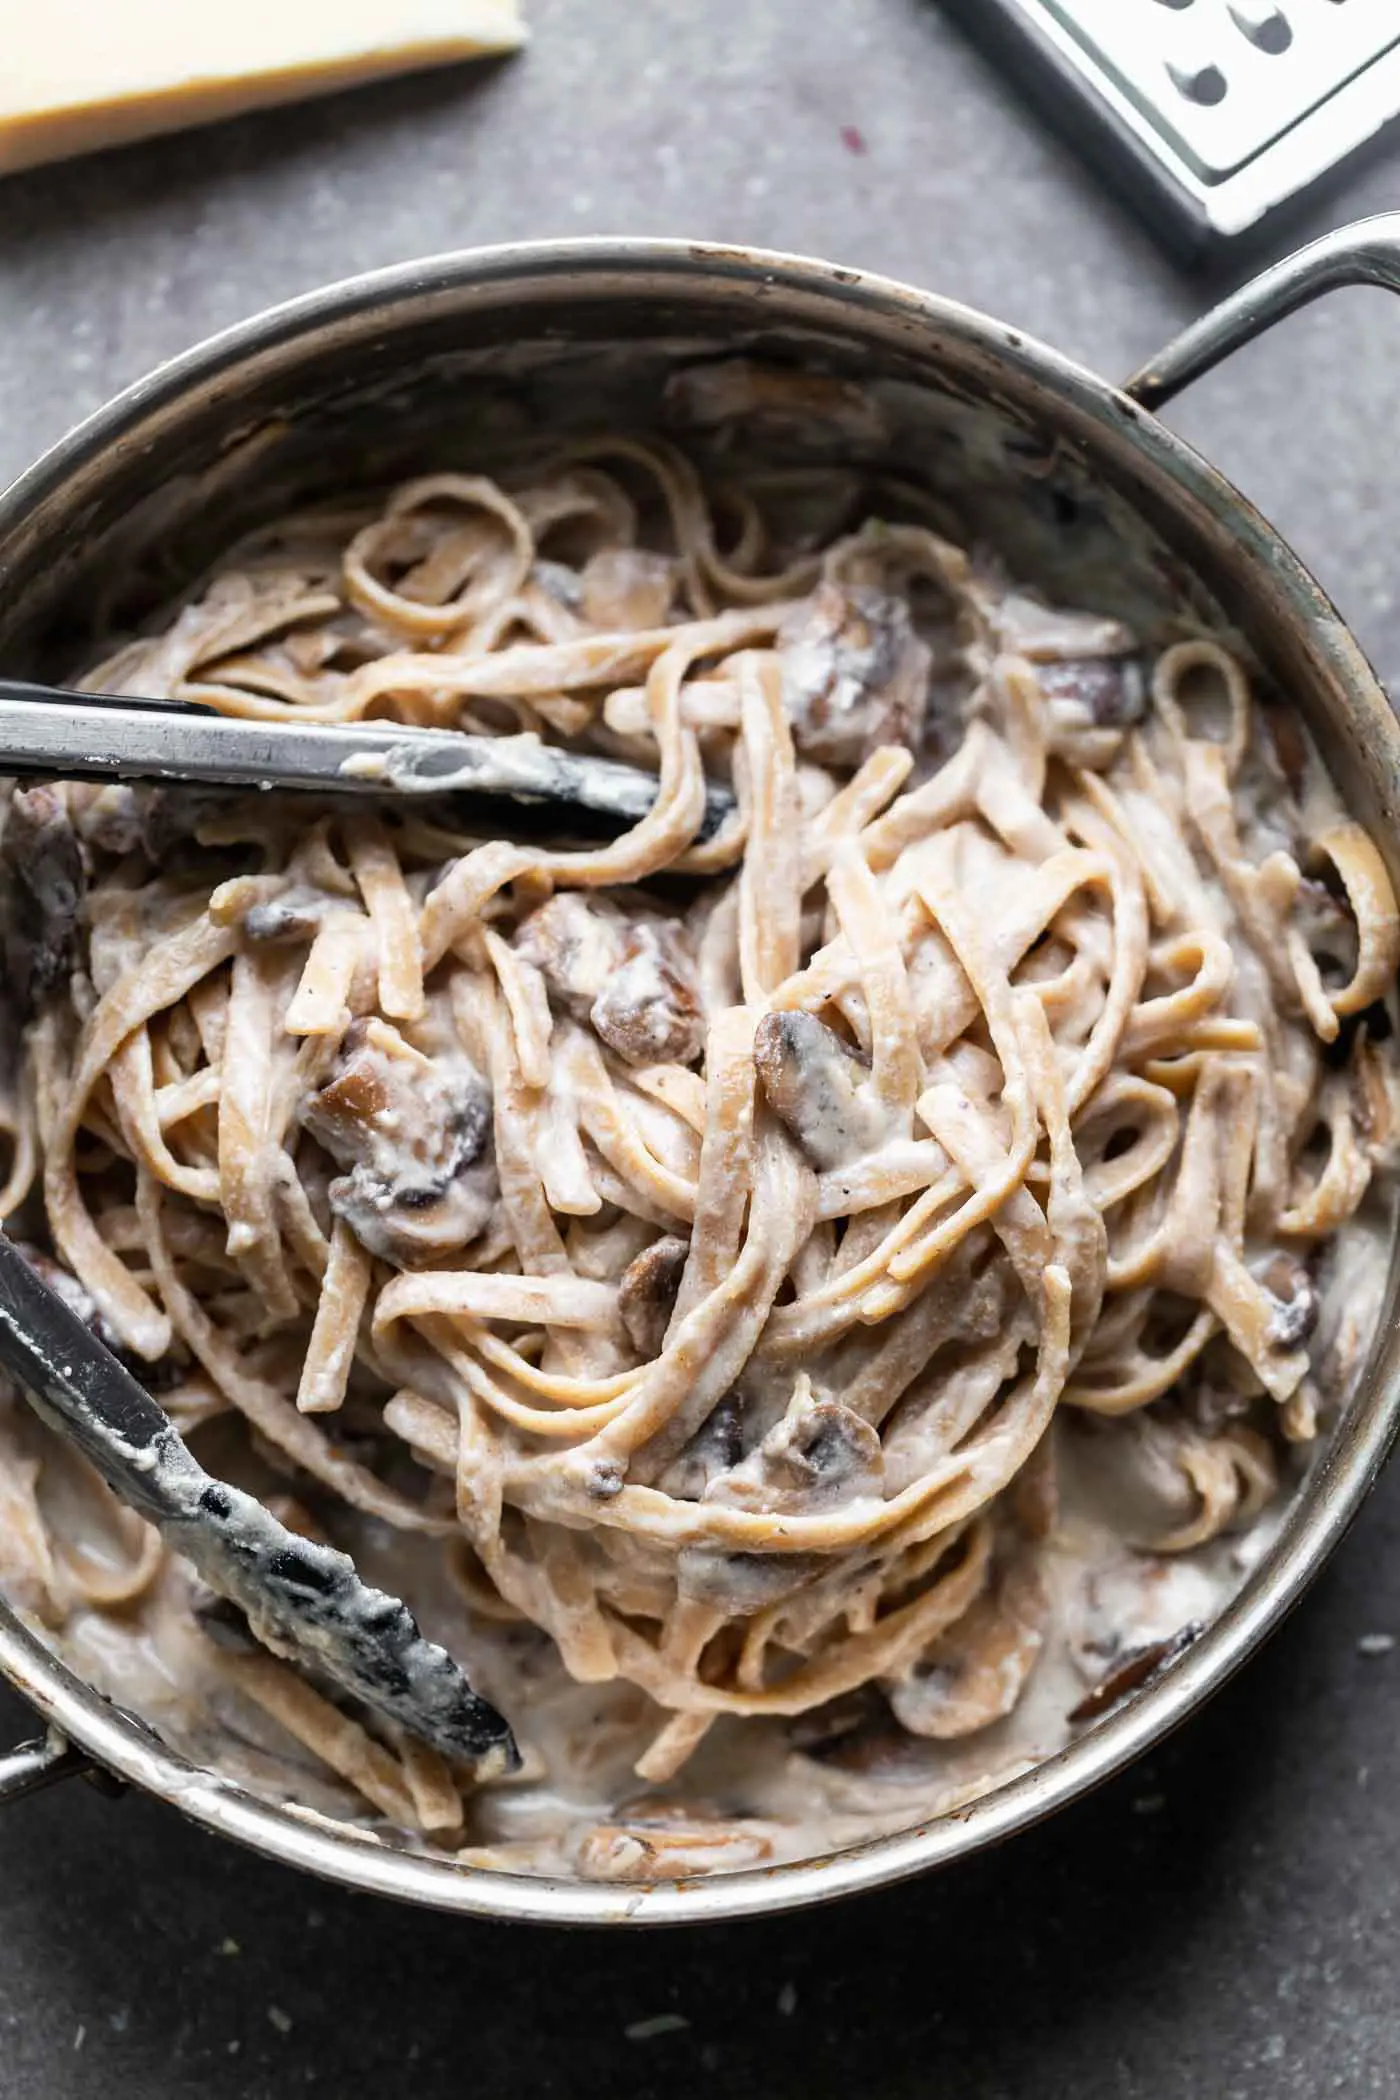 Creamy Mushroom and Ricotta Pasta is the perfect way to get your pasta fix this winter season! Easy to prepare with minimal ingredients and a sure-fire hit with pasta lovers.